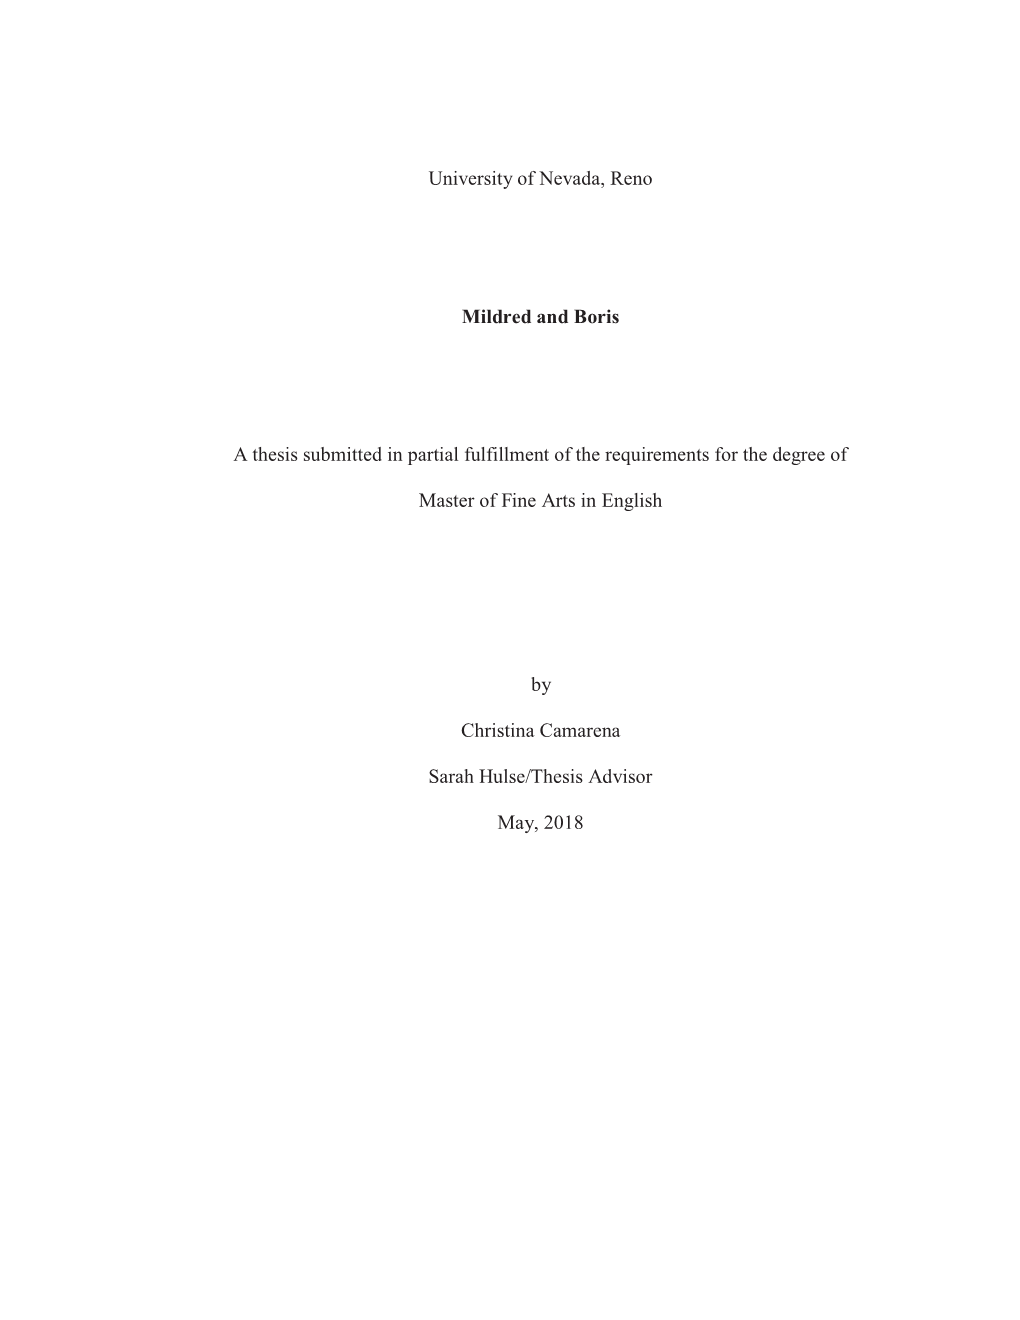 University of Nevada, Reno Mildred and Boris a Thesis Submitted In